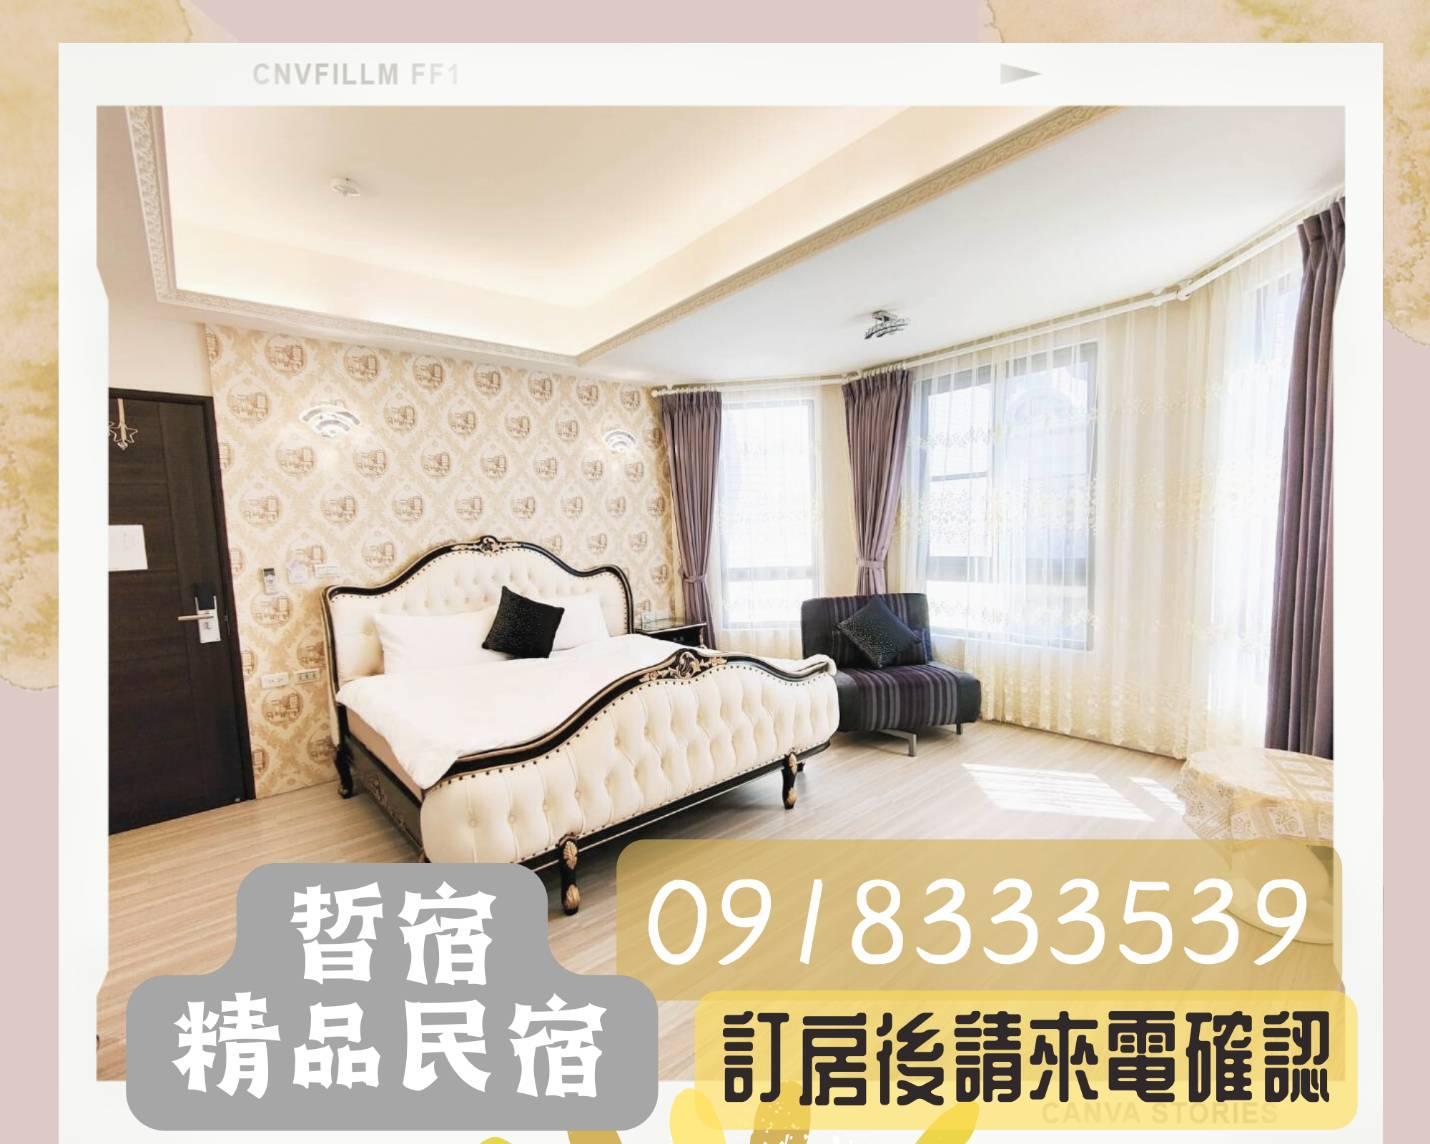 Lucent Bed & Breakfast - Penghu County